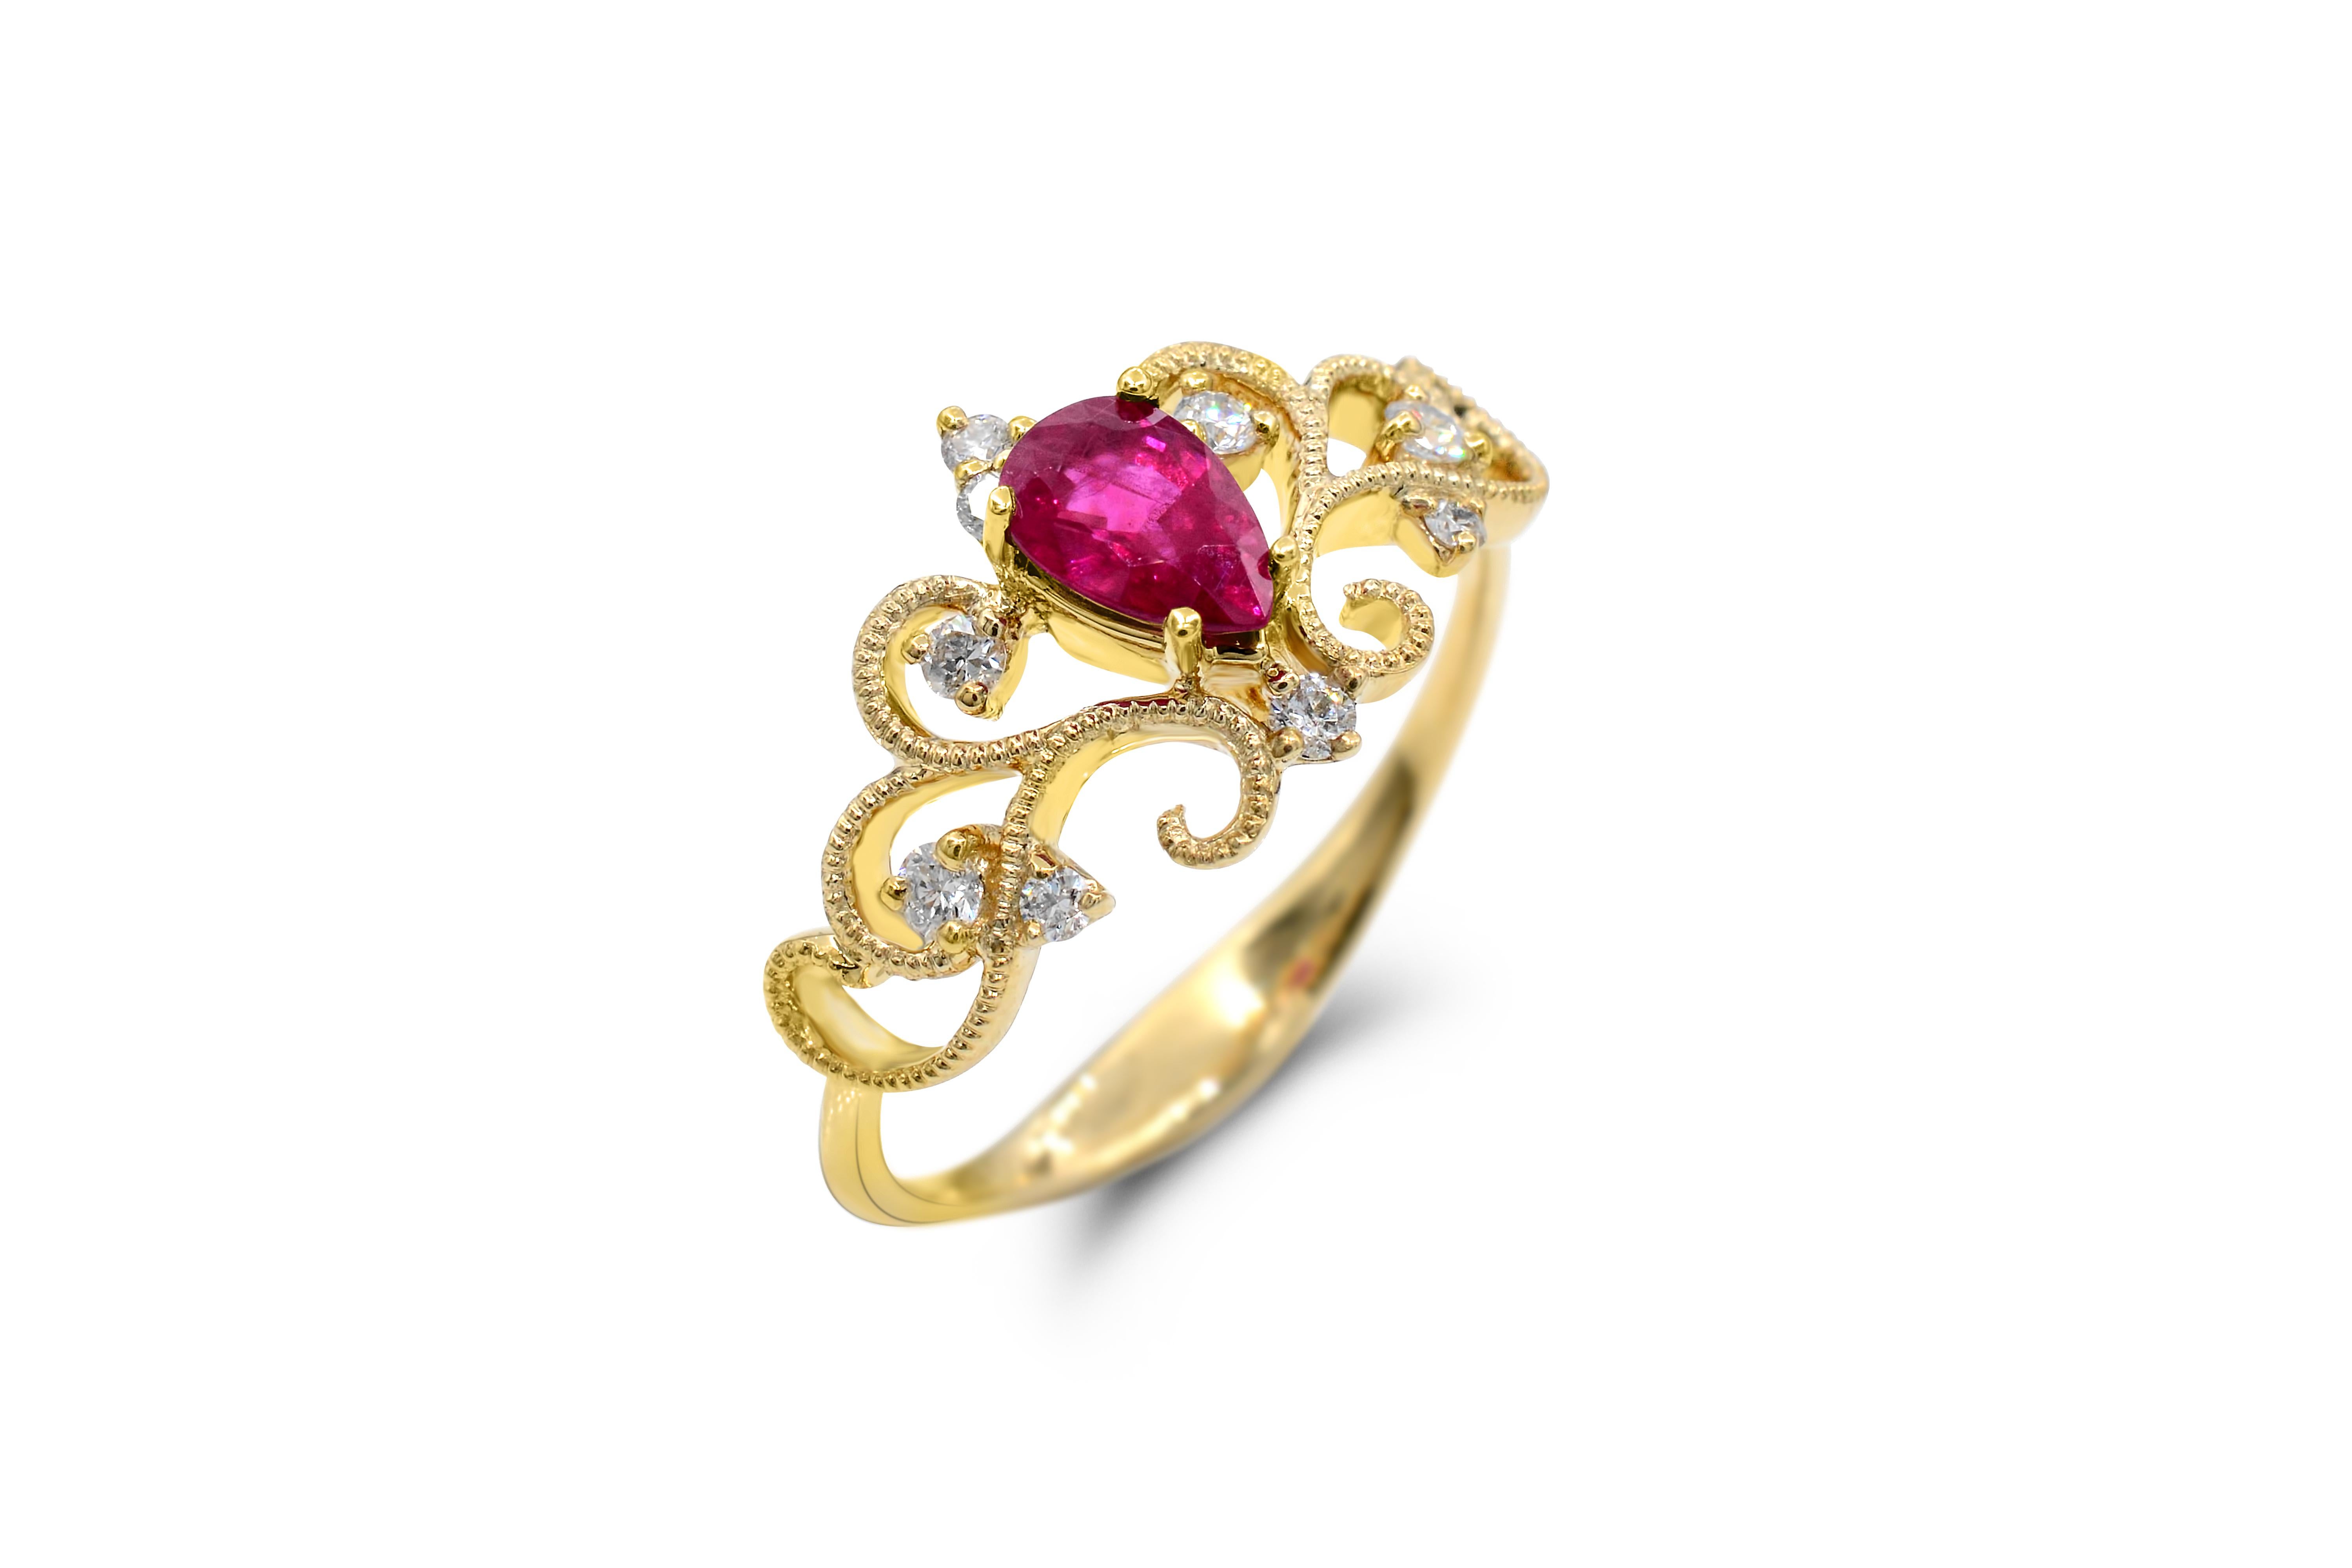 Indulge in the elegance of our Pear-Cut Ruby and Diamond Accent Curvilinear Migraine Shank Ring in 14K Yellow Gold. Crafted with meticulous attention to detail, this ring boasts a stunning combination of one pear- cut ruby accented by sparkling